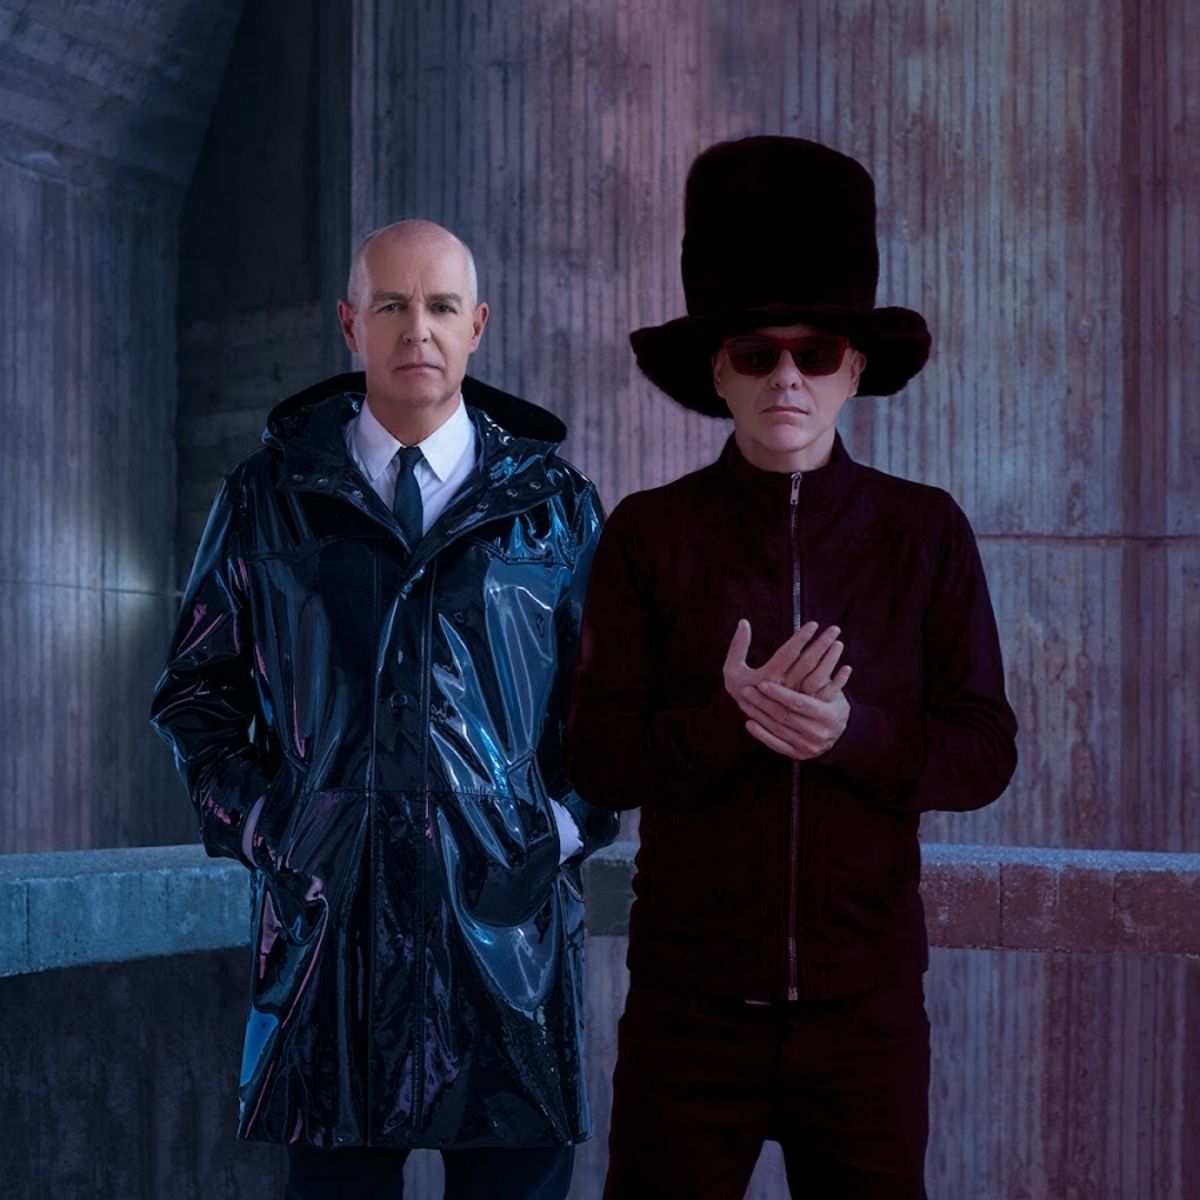 One of the Pet Shop Boys' professional photos